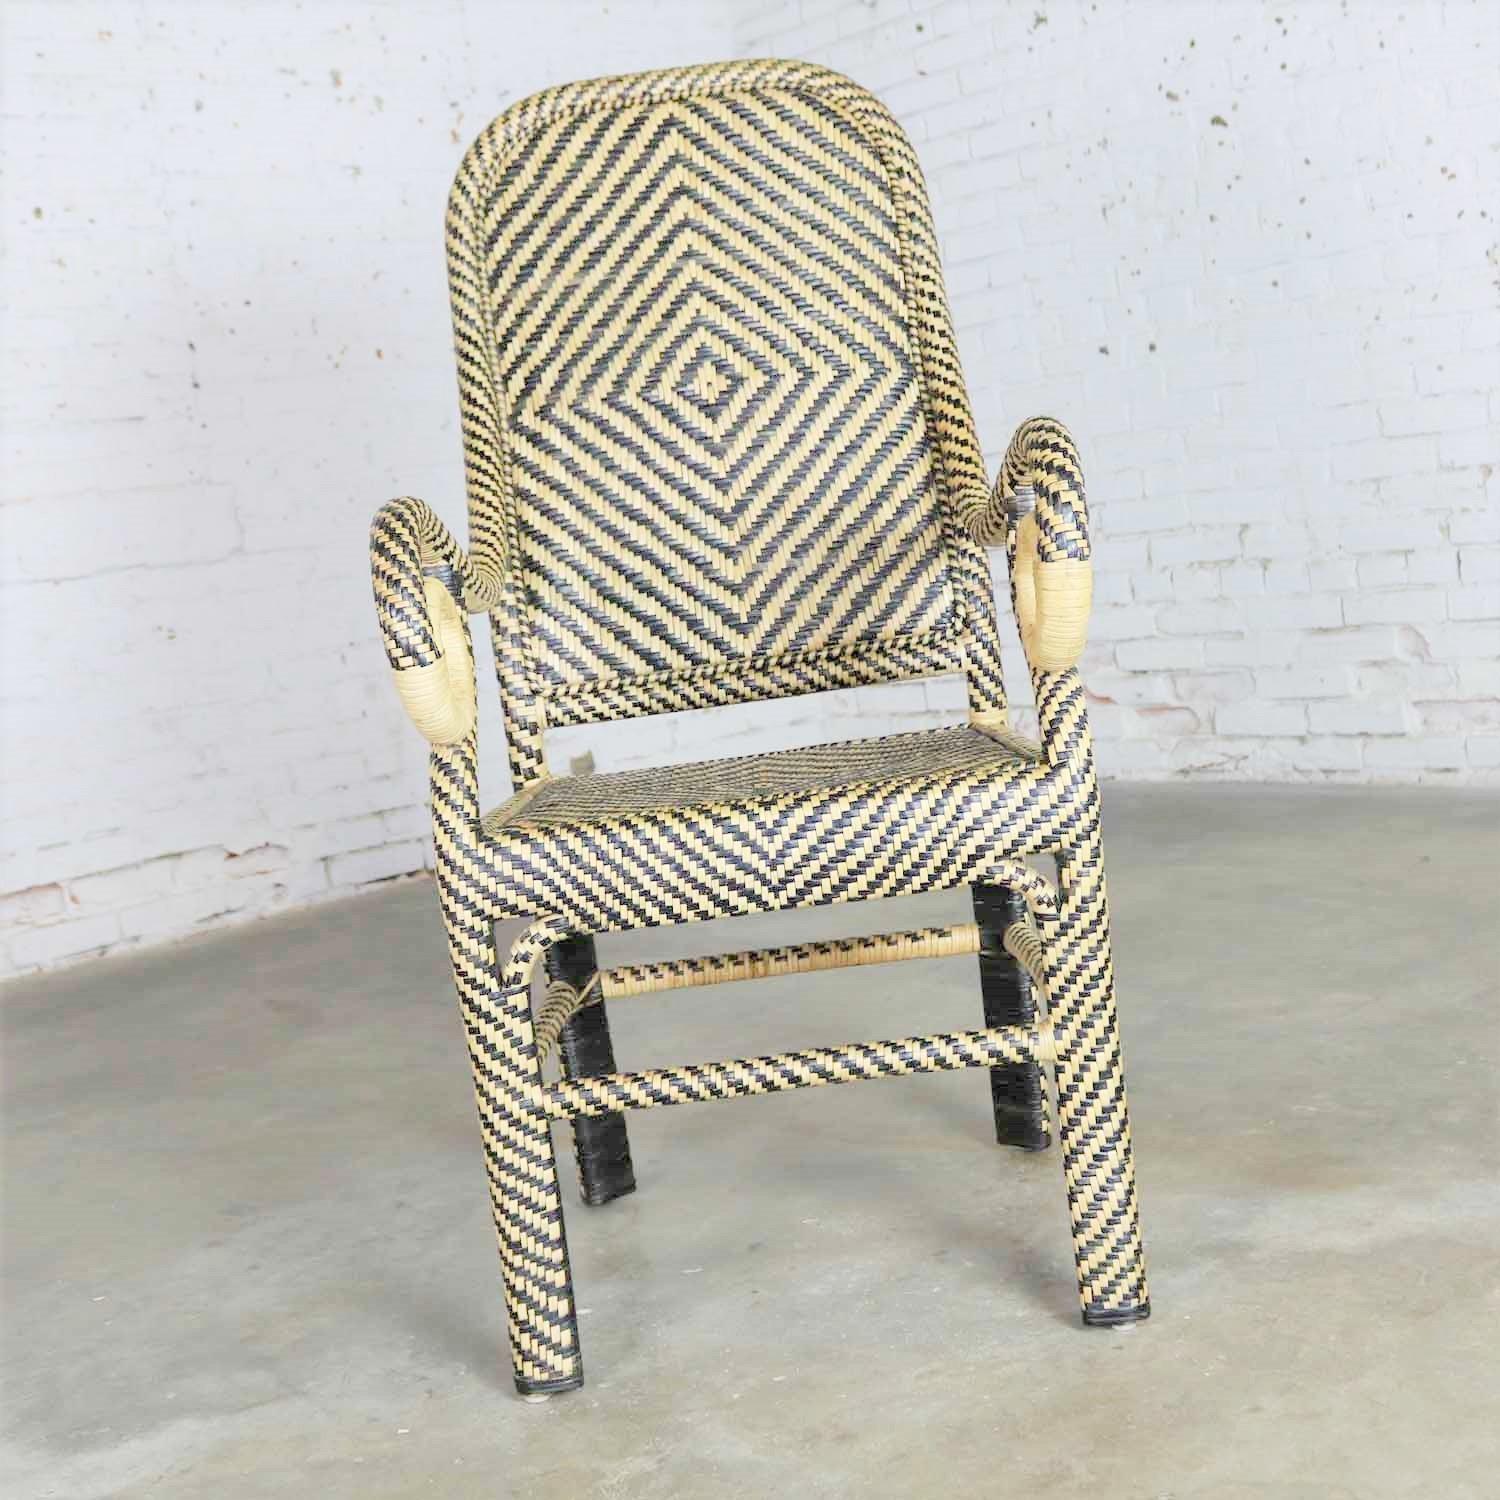 Handsome vintage two-tone rattan wicker chair with a chevron pattern, spiral arms and a tall rounded back. It is in fabulous vintage condition with no outstanding flaws. Please see photos, circa 20th century.

I don’t know if this came from a